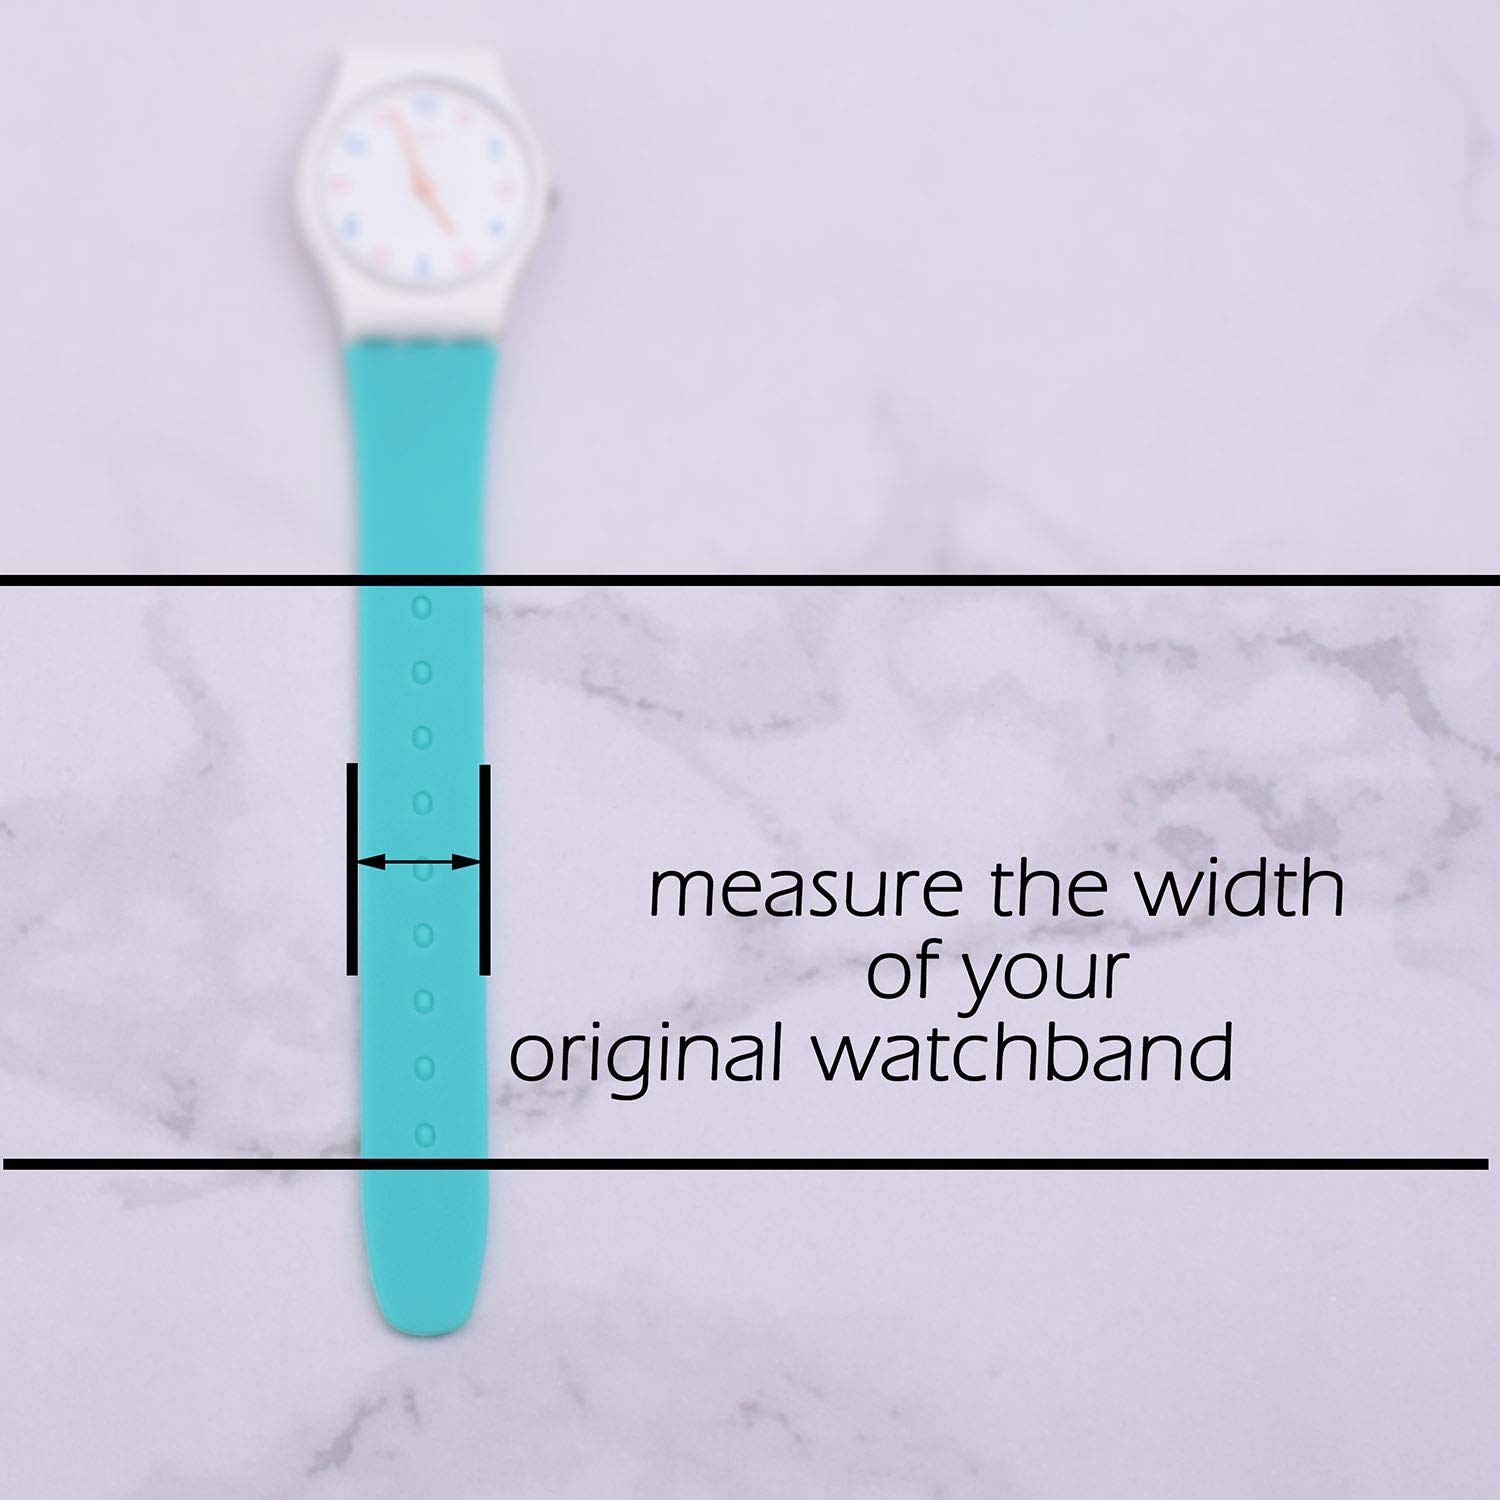 Green Olive Replacement Waterproof Silicone Rubber Watch Strap Watch Band for Swatch (17mm 19mm 20mm), Black, 20mm, Casual